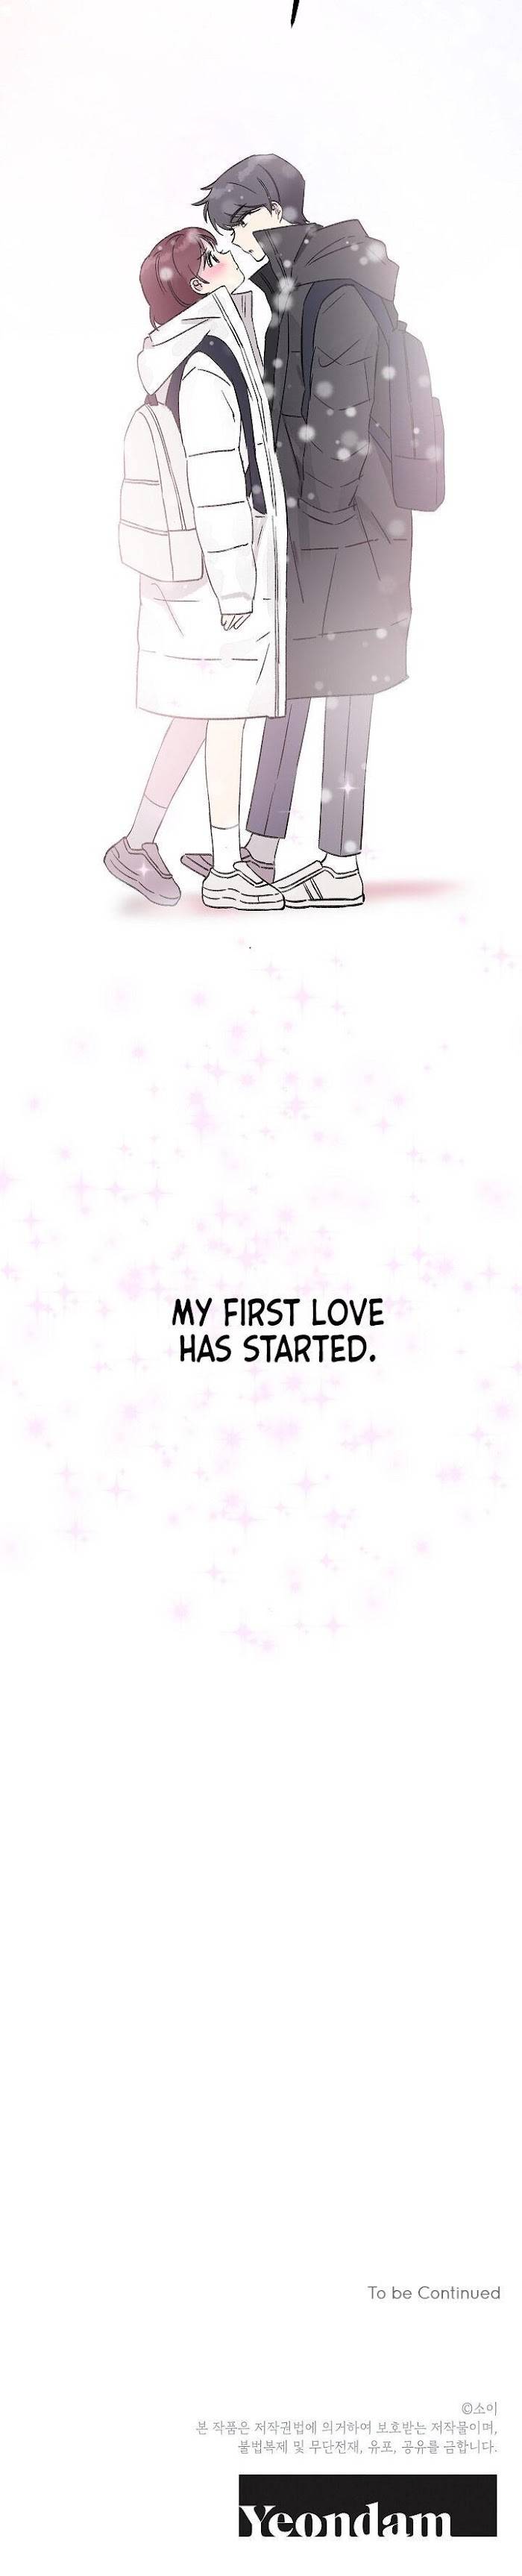 First Love Operation chapter 1